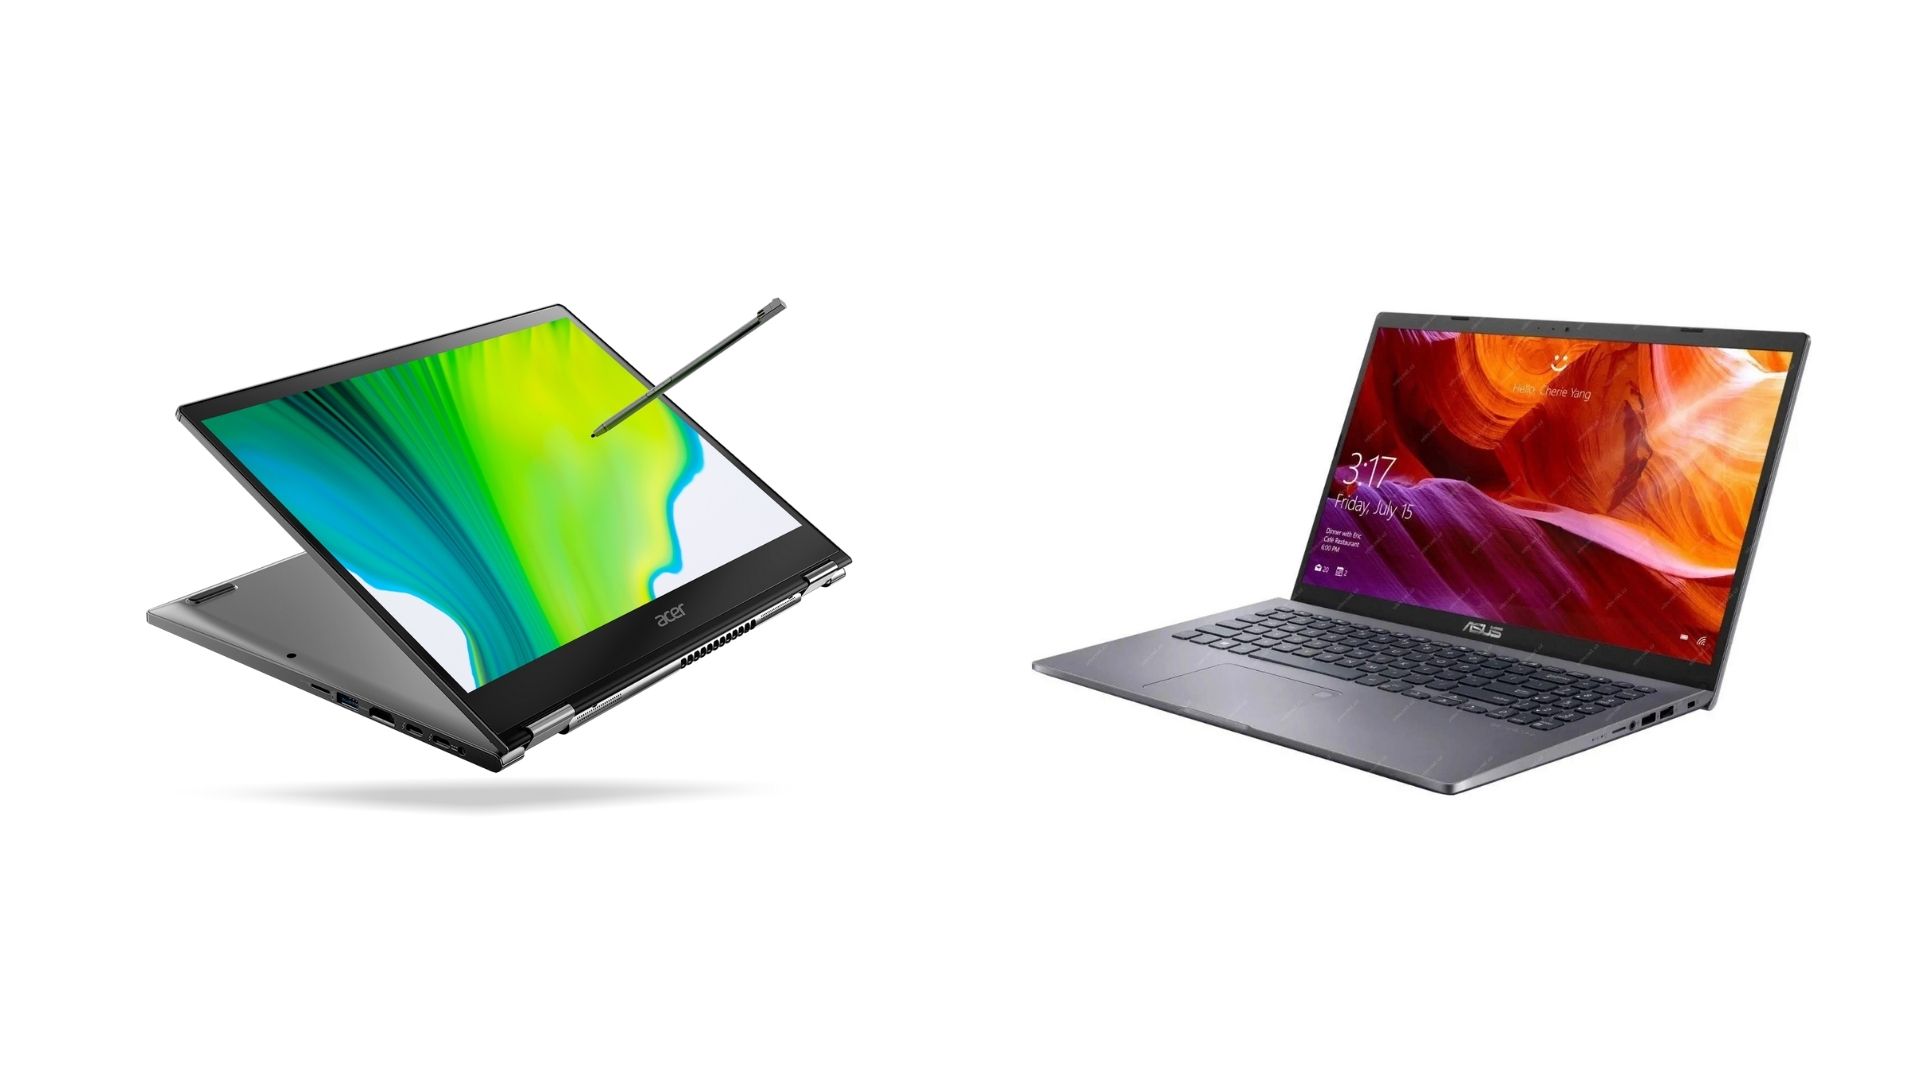 Best Laptops for Photo Editing